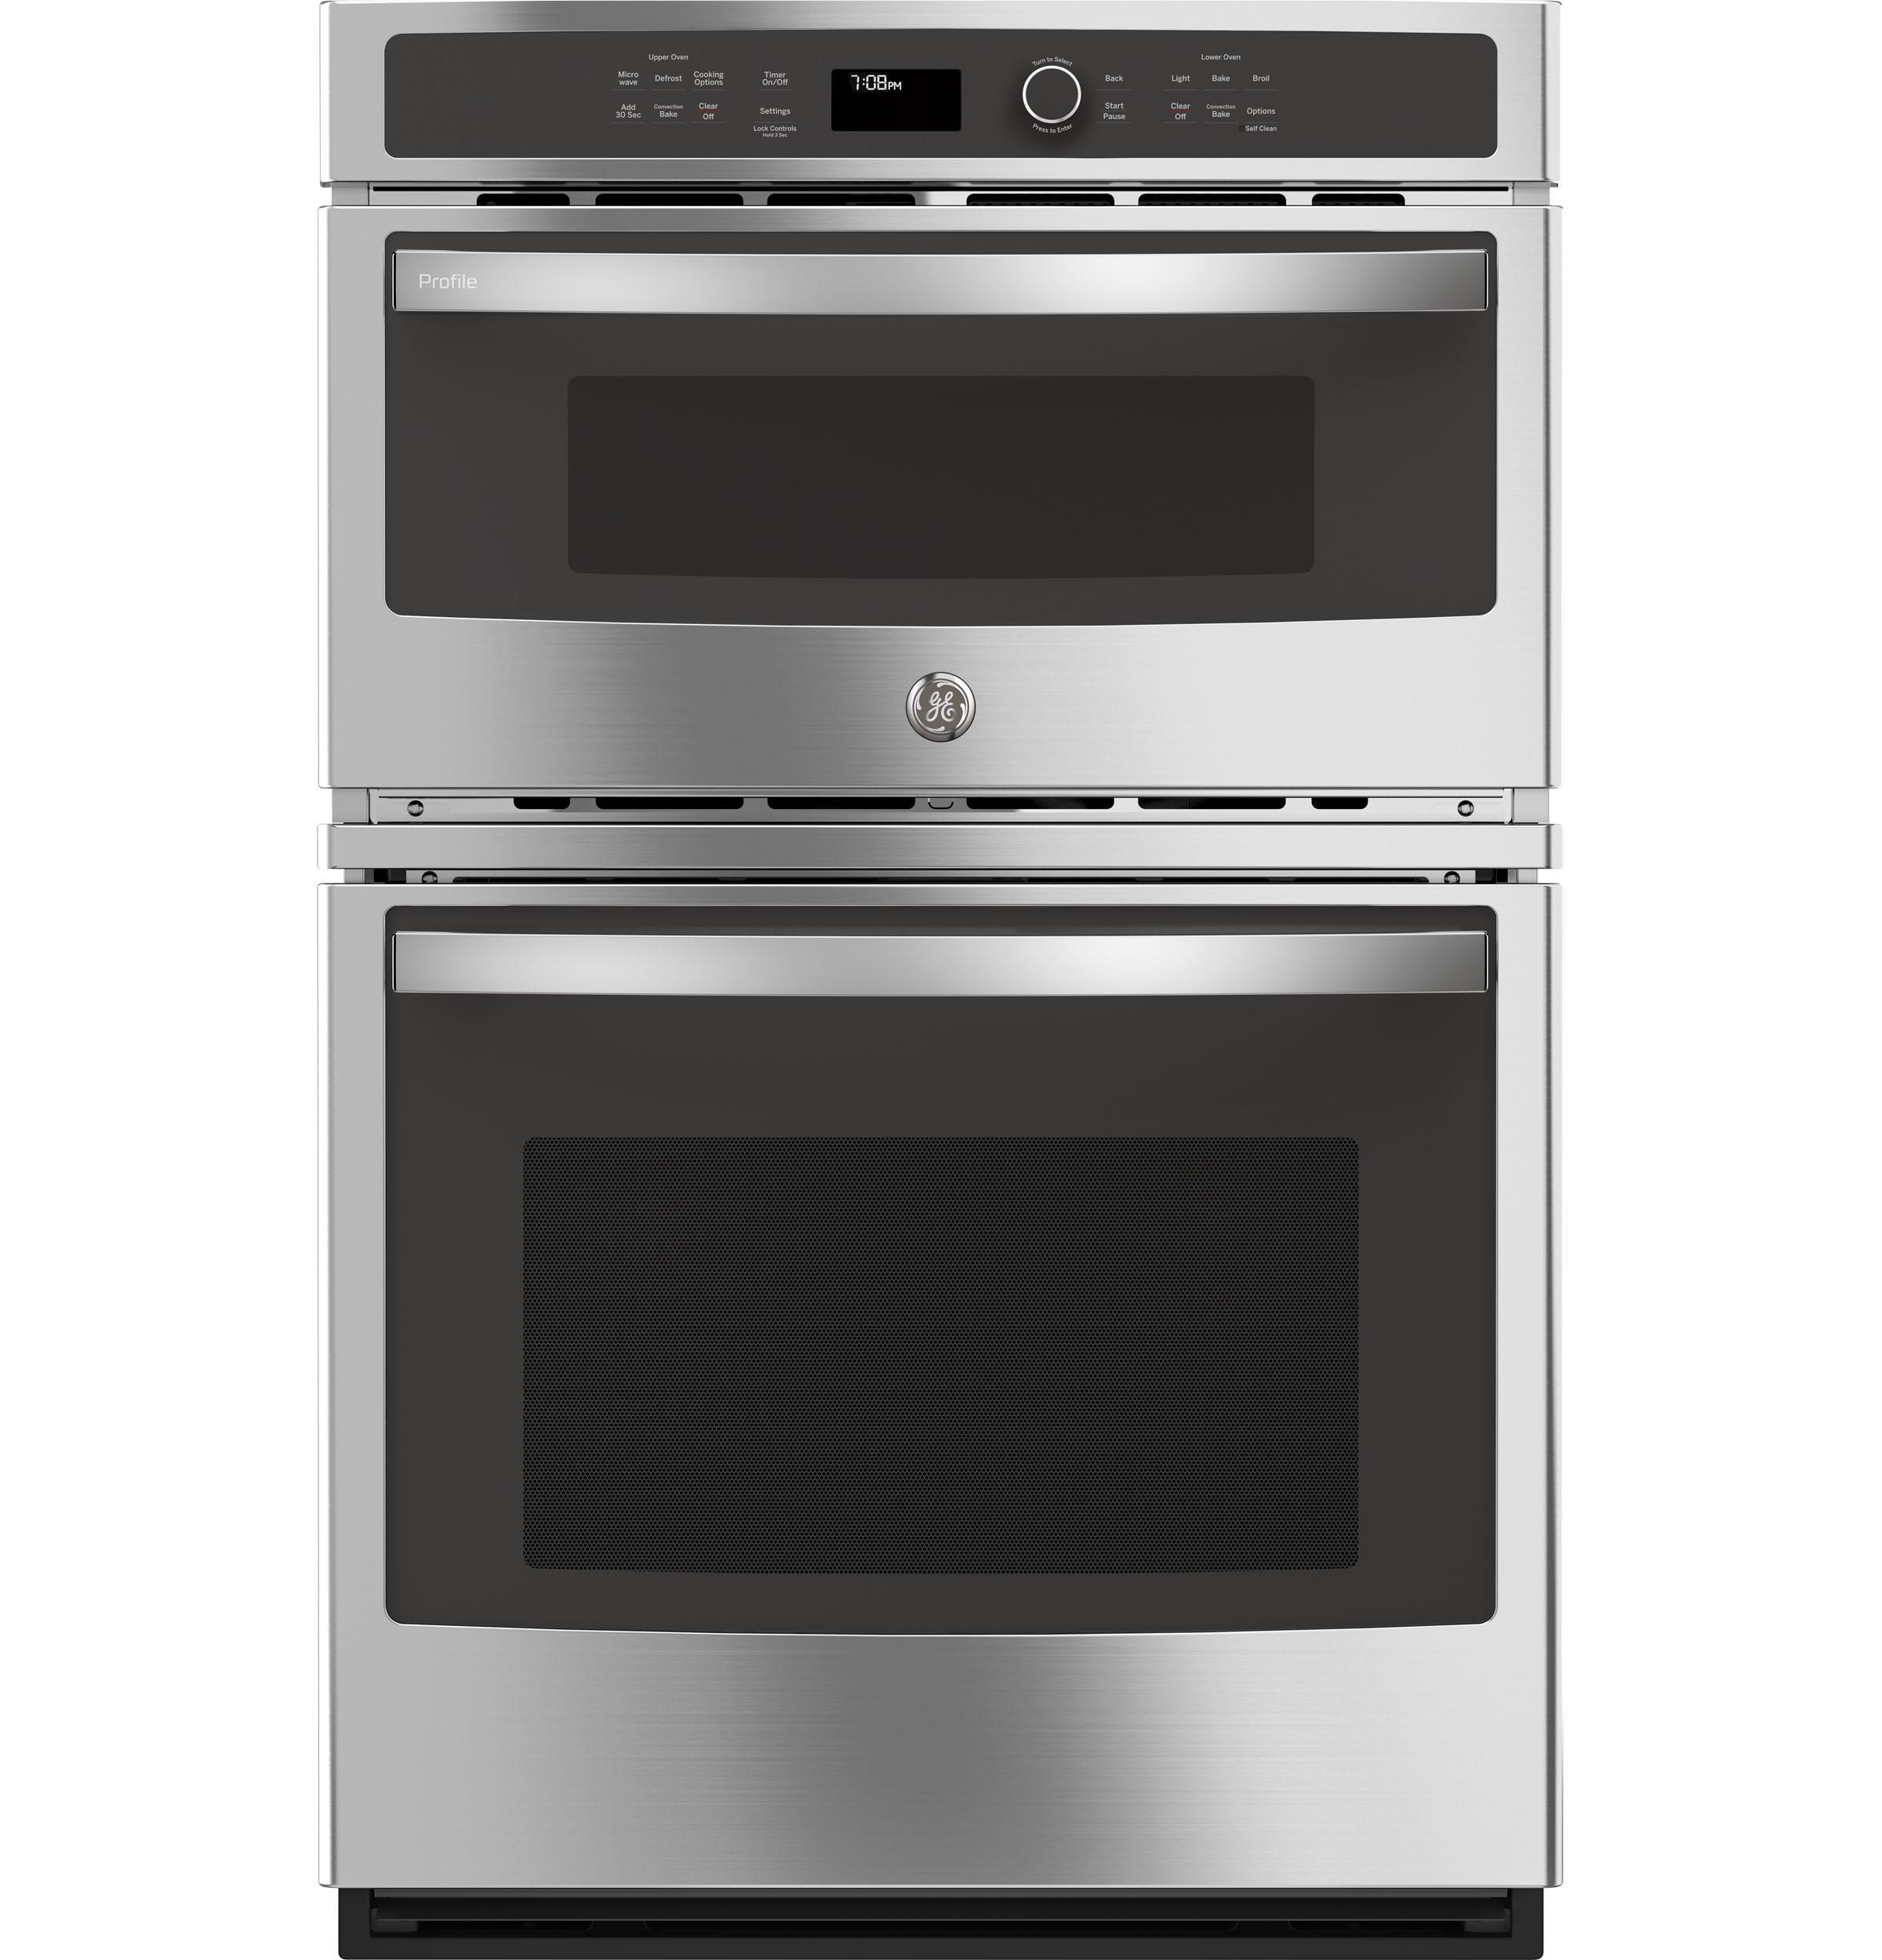 General Electric PK7800SKSS 27 Inch Built-In Electric Combination 27 Inch Stainless Steel Double Wall Oven